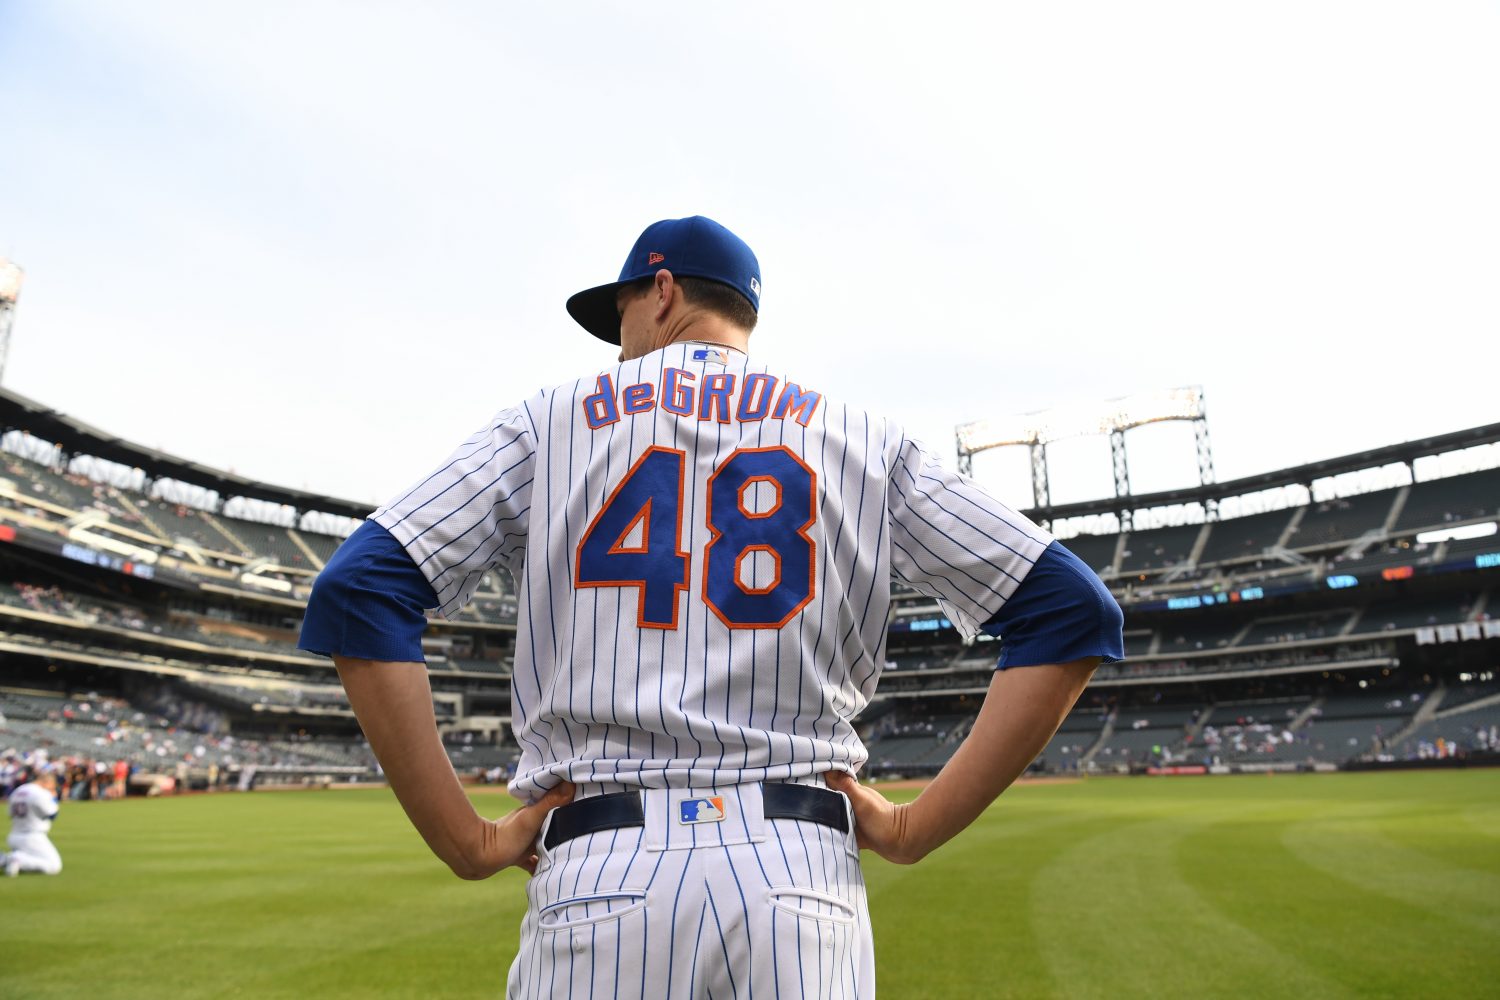 Jacob deGrom During Warmups in 2019